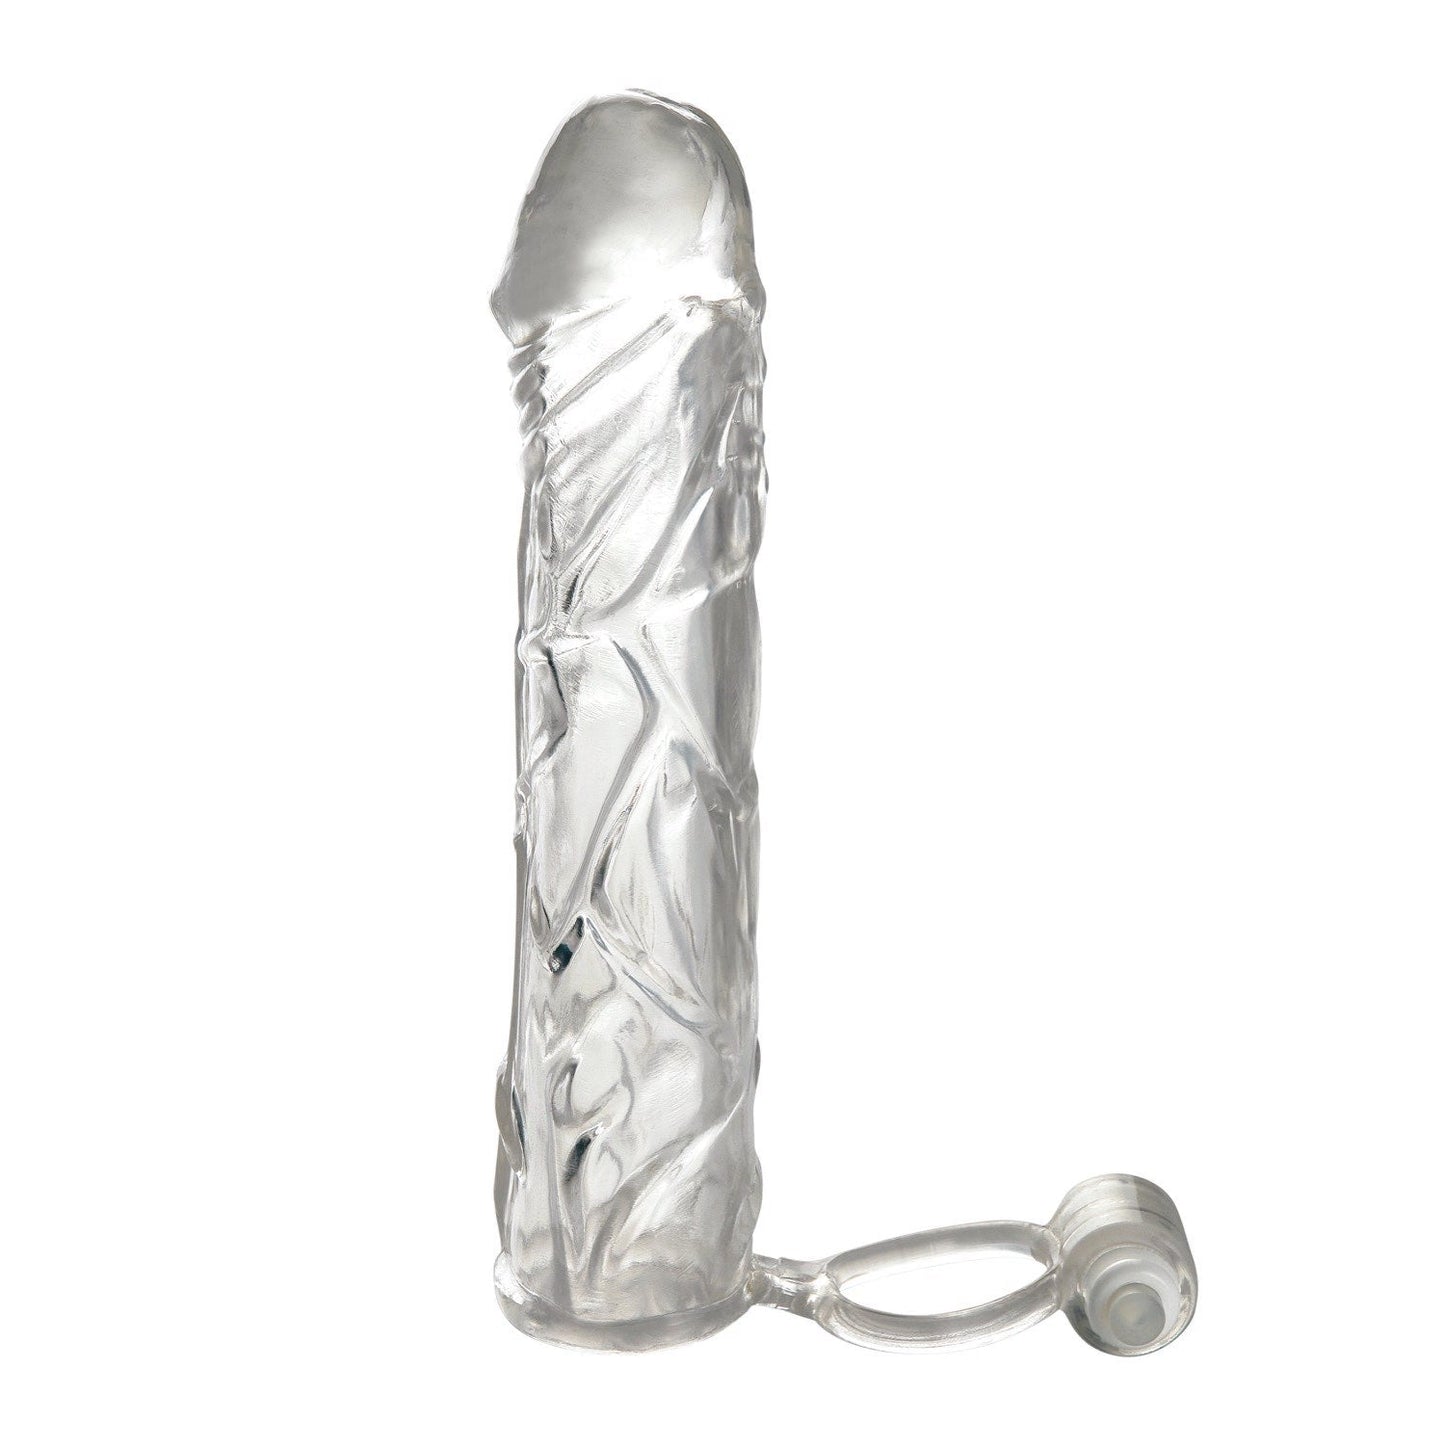 Vibrating Super Sleeve - Clear Penis Extension Sleeve with Vibrating Ball Strap